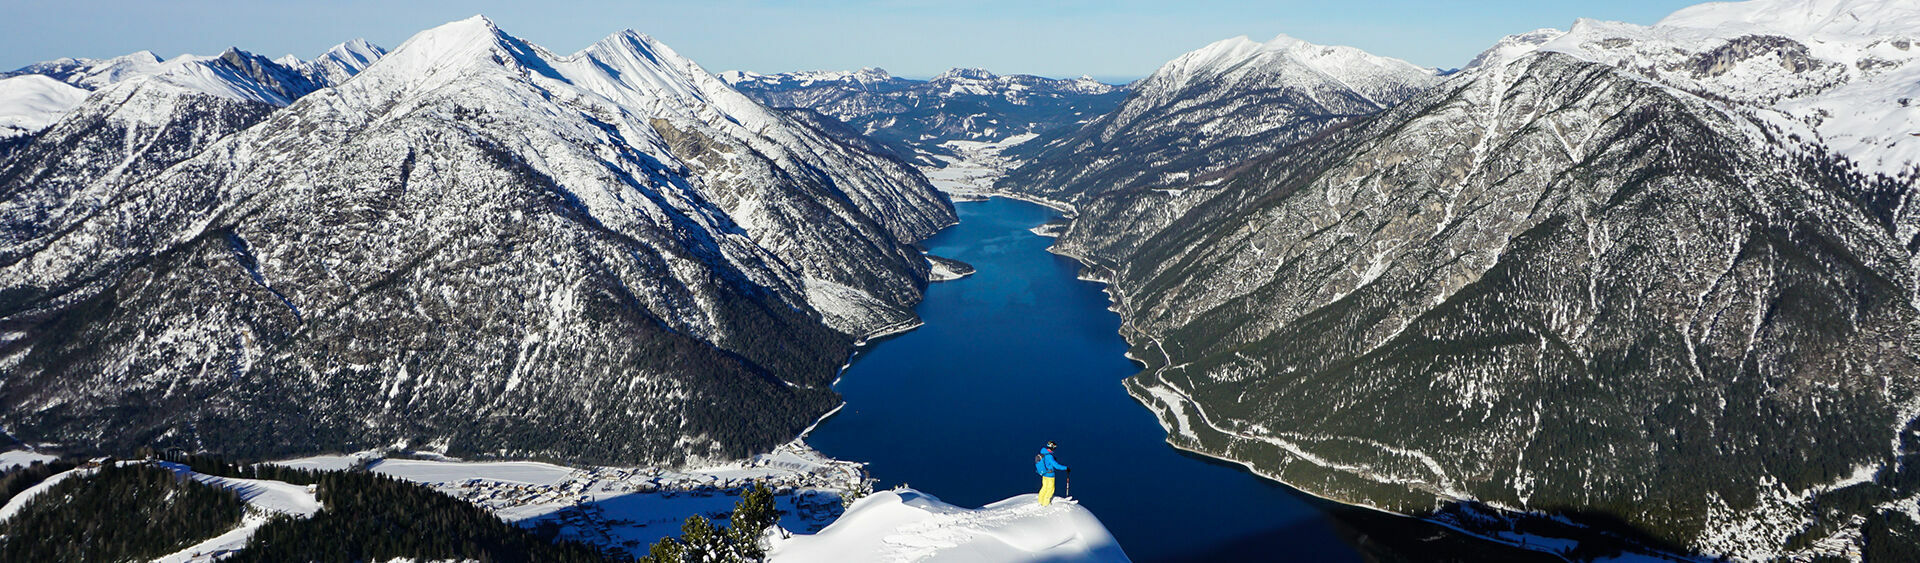 Ski tour on the Bärenkopf with views of Lake Achensee and its surrounding villages.